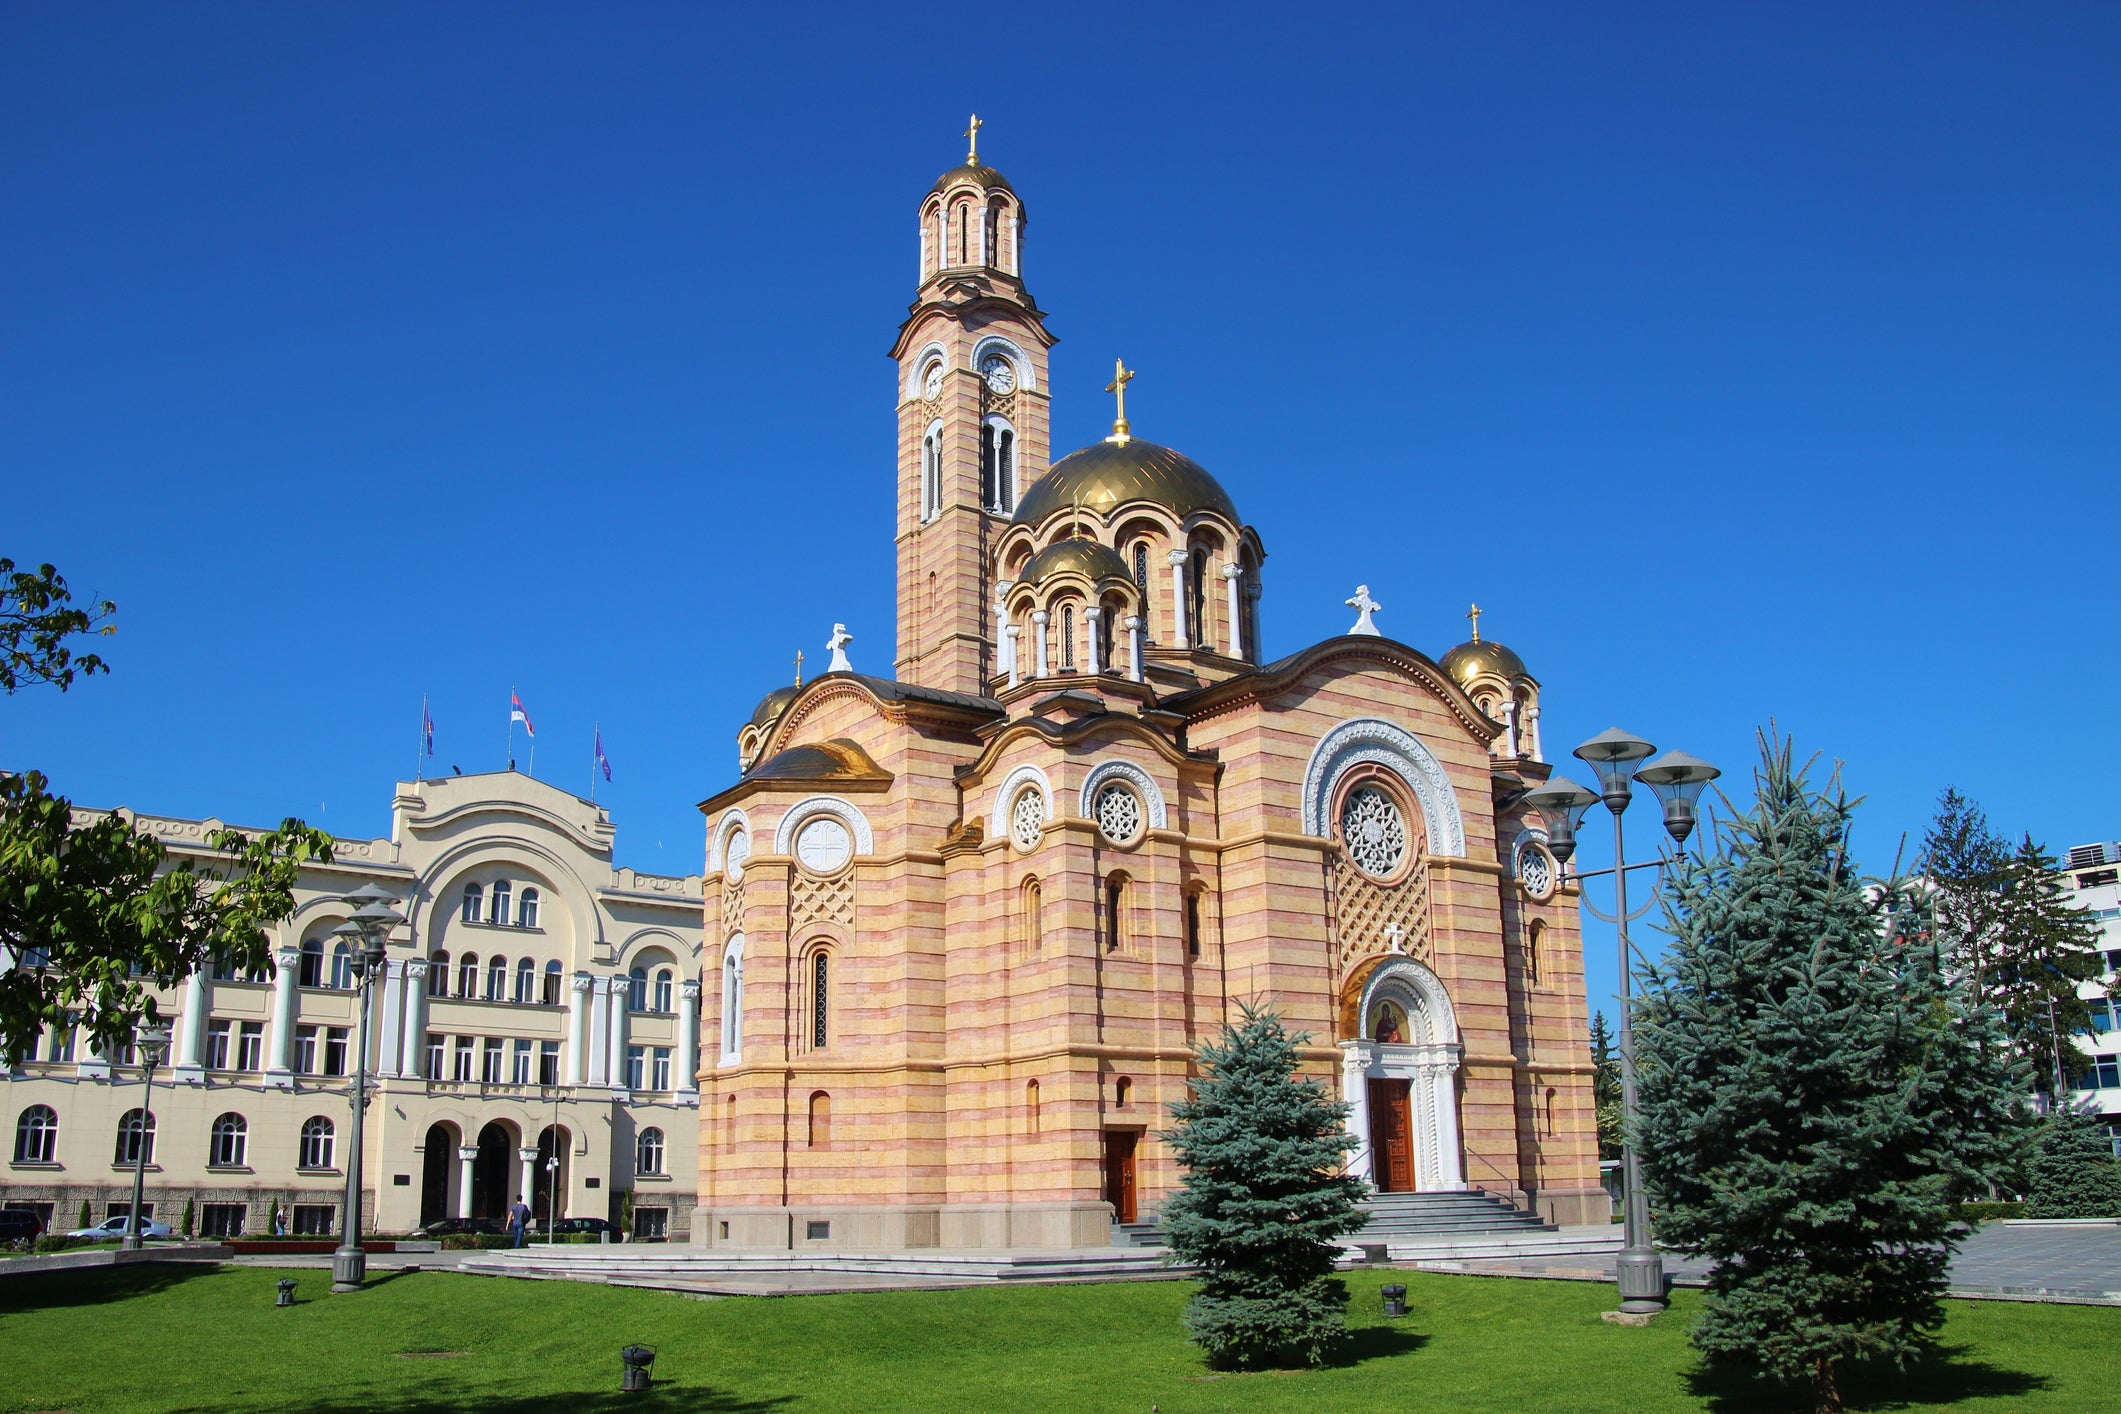 The cathedral in Banja Luka, Bosnia and Herzegovina